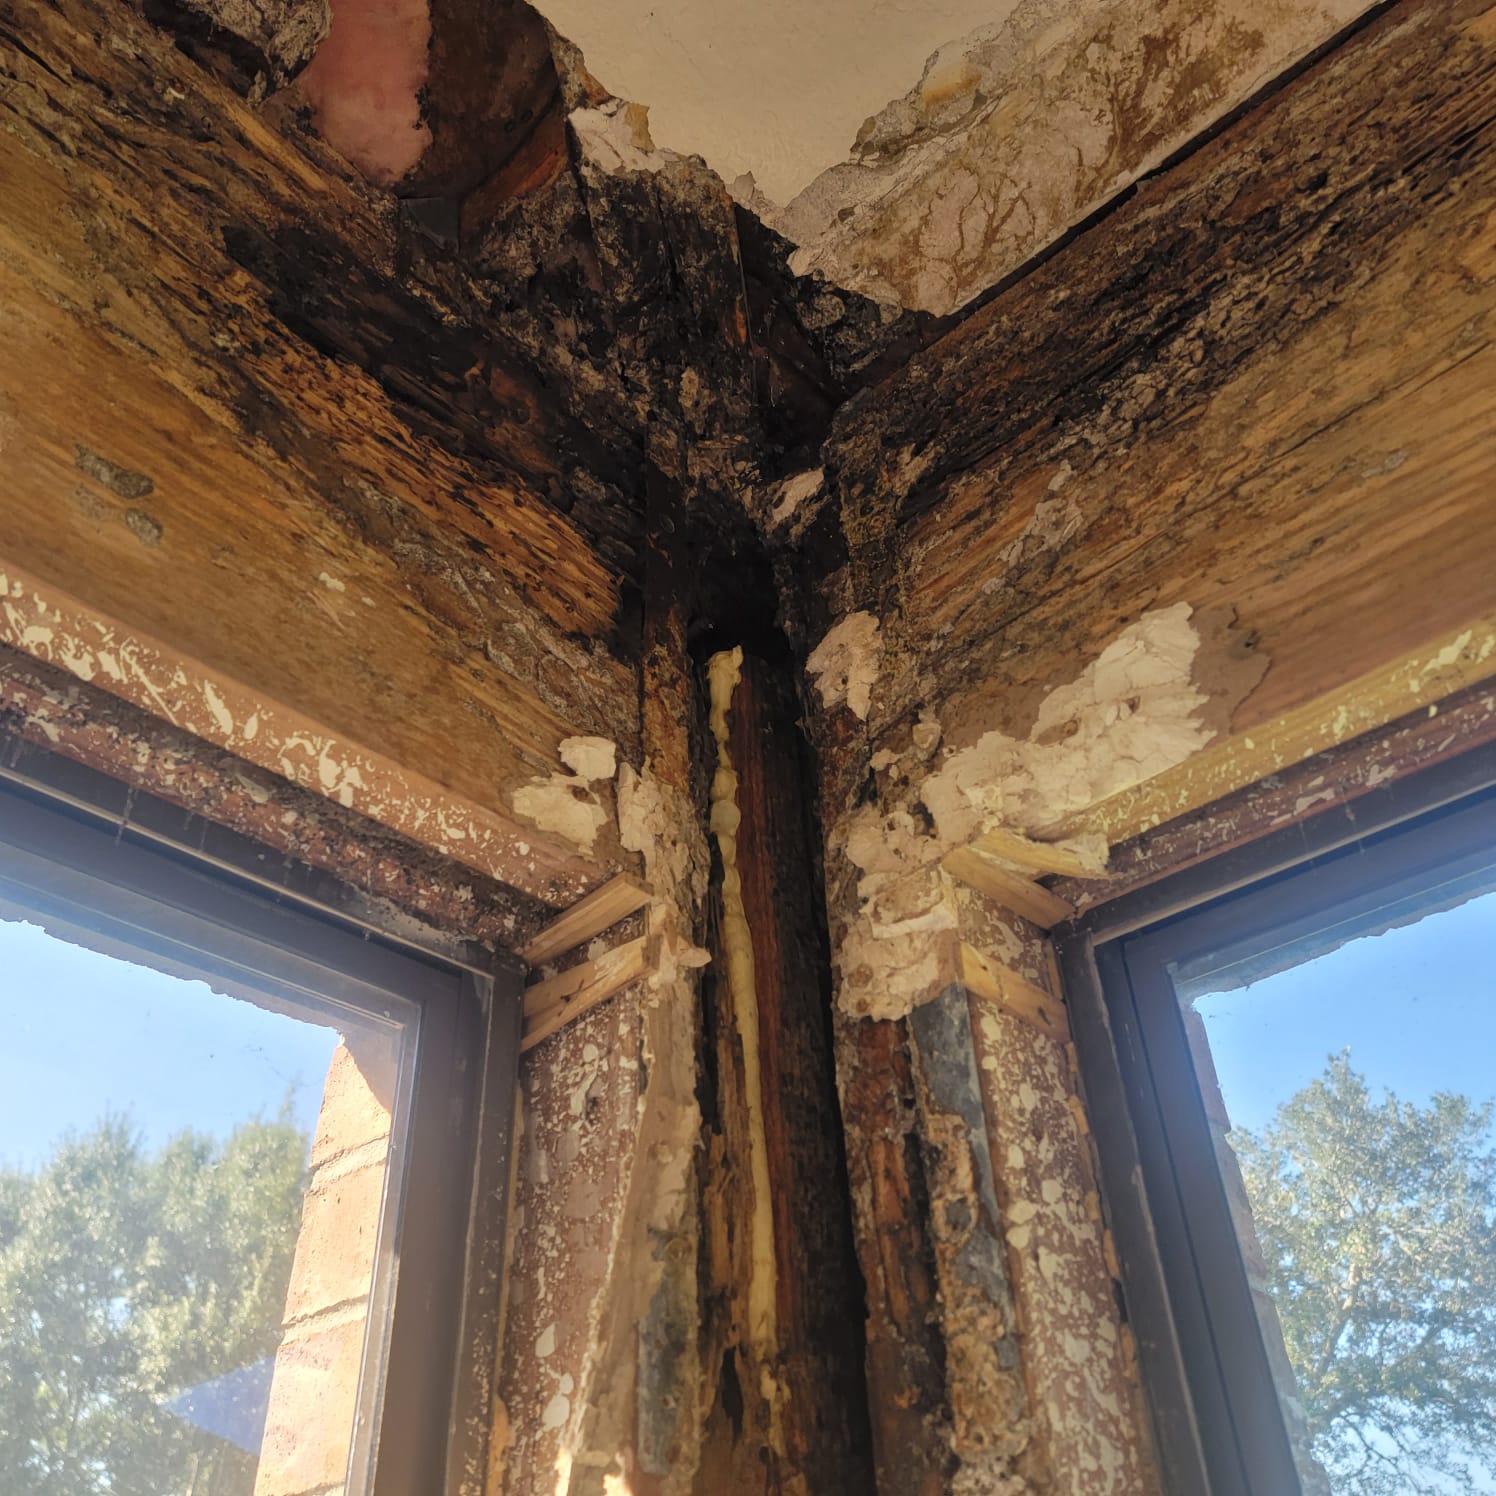 This mold job began as an upstairs patio leak. We investigated, demoed, remediated the mold and passed with flying colors.